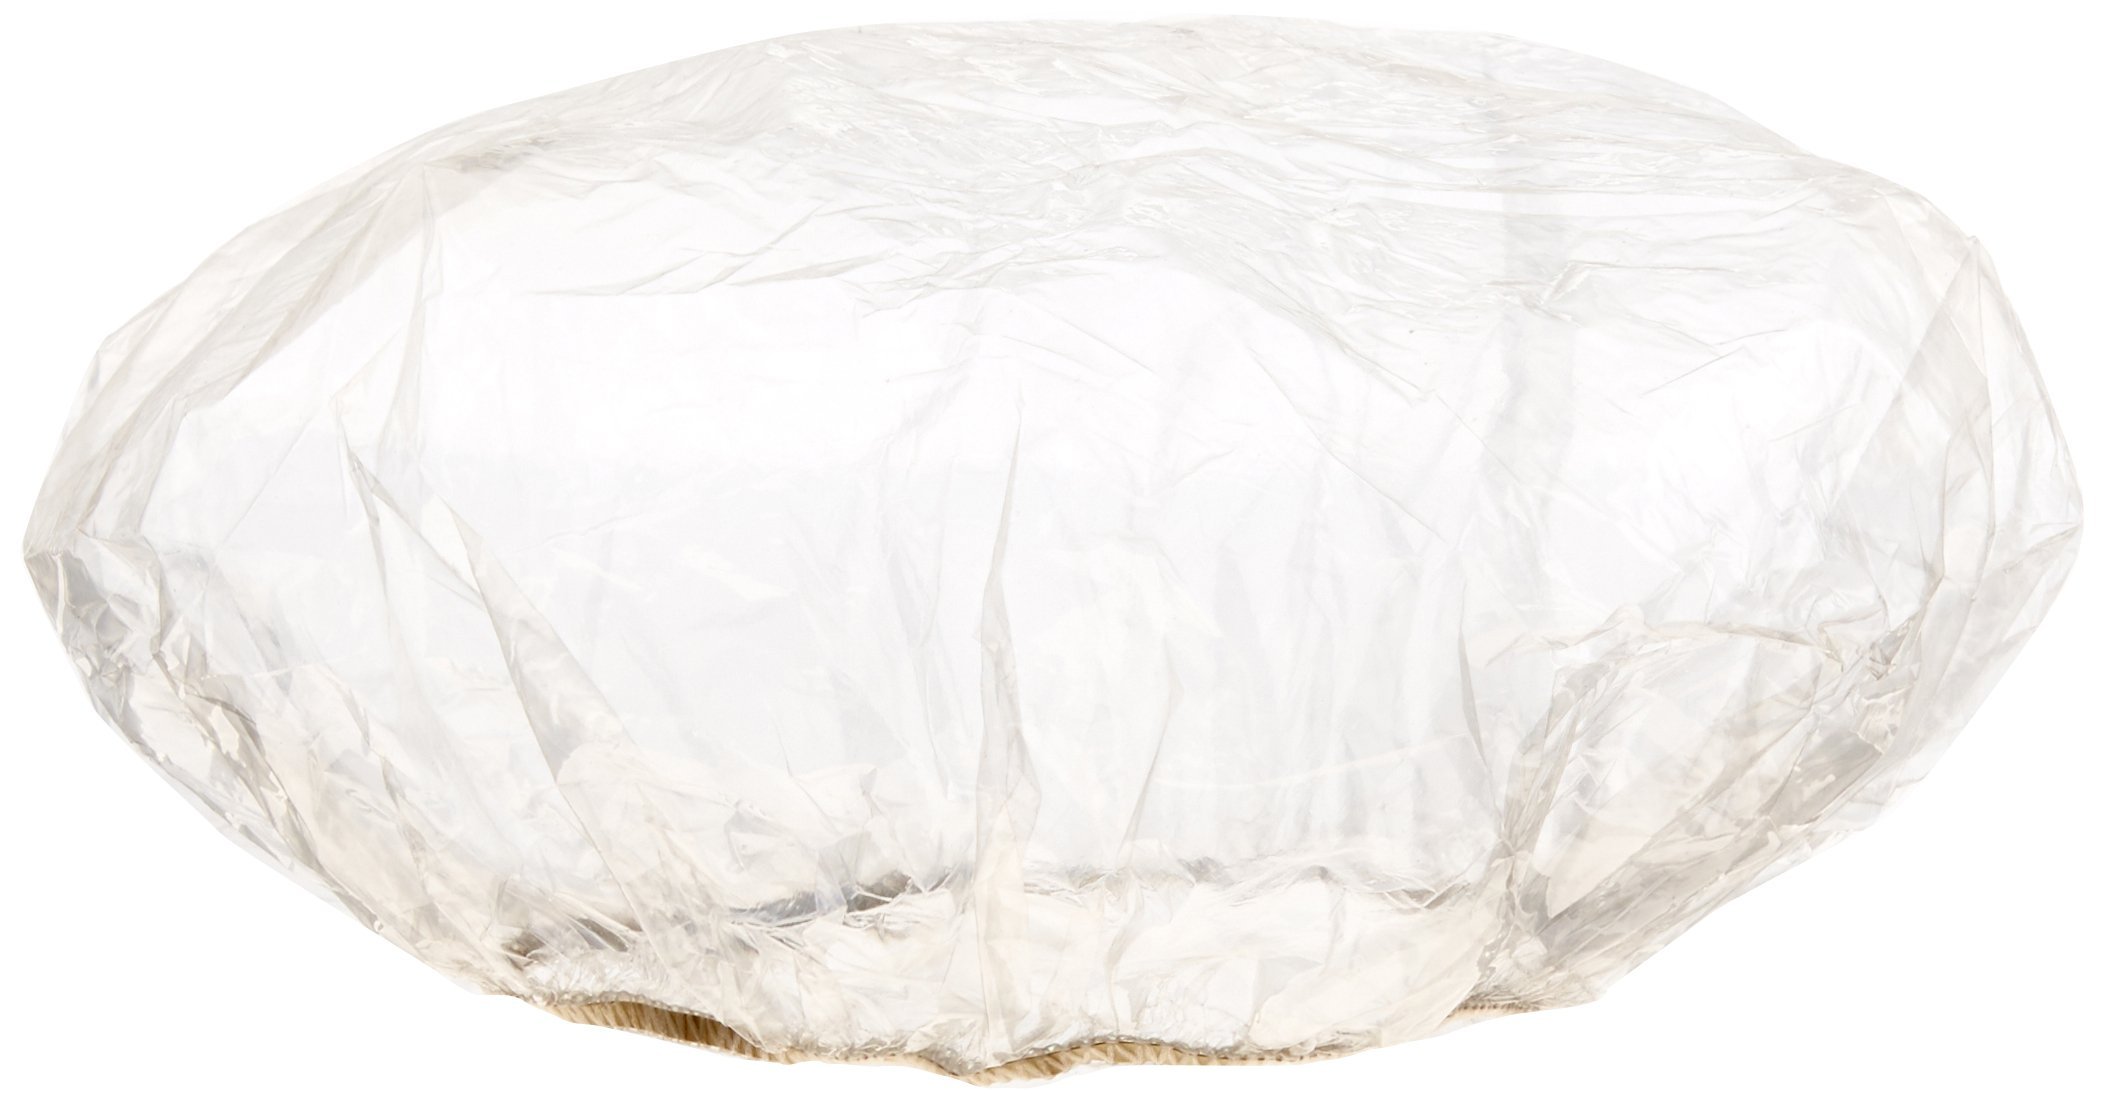 Medline NON24373 Single-Use Shower Caps, Clear (Pack of 500)